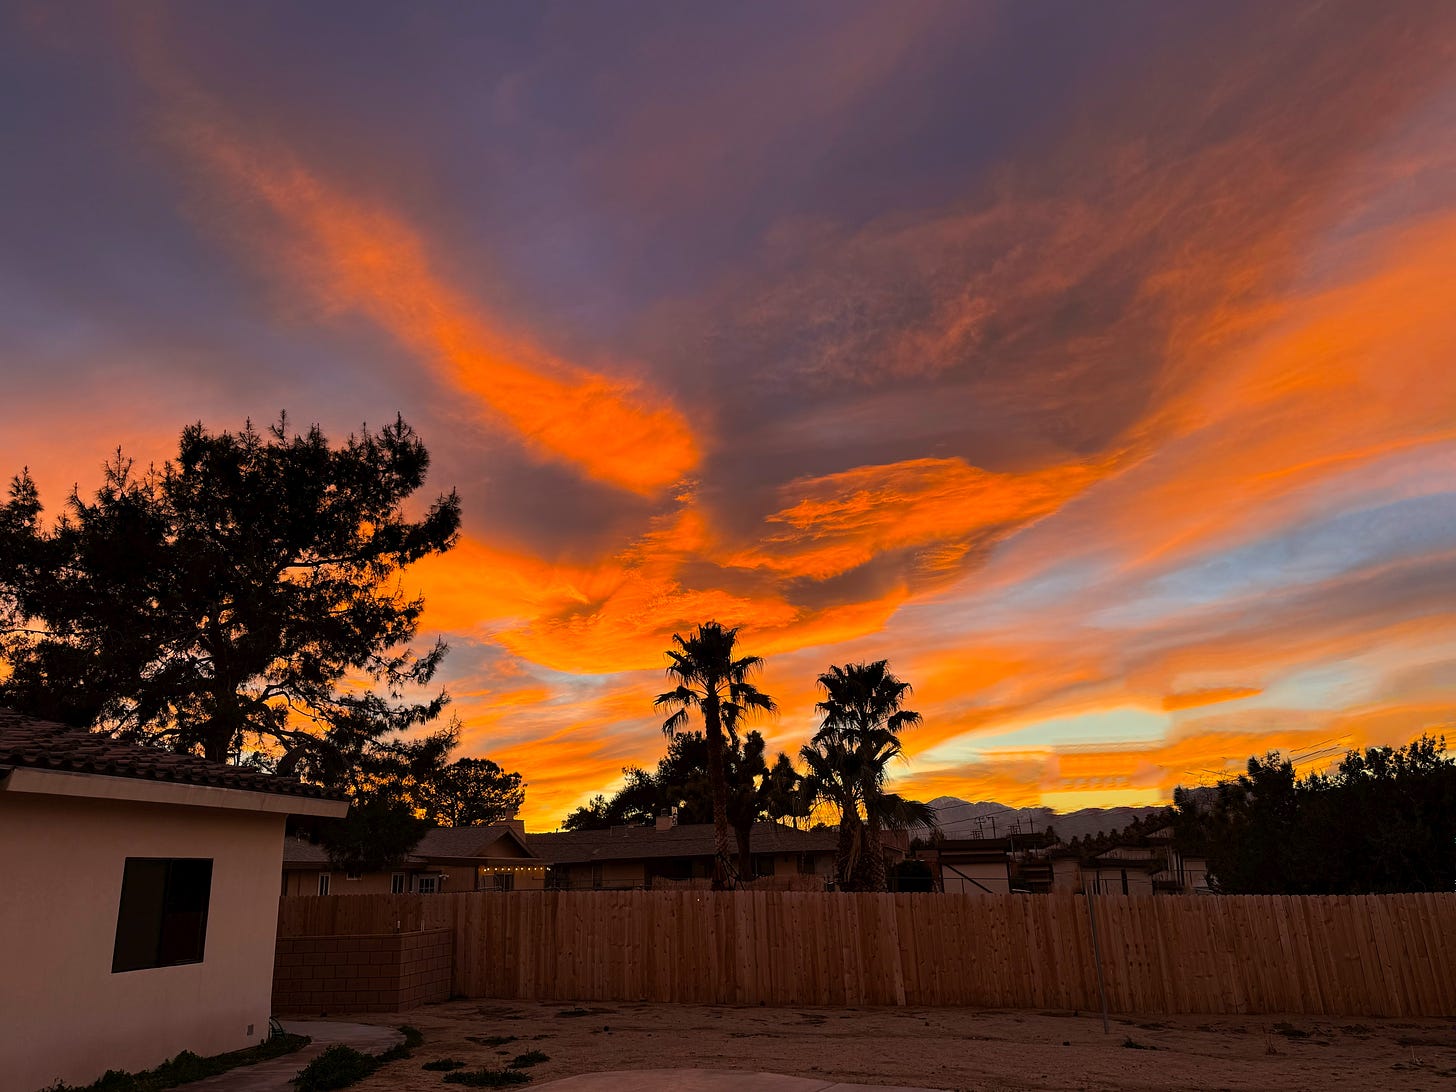 Low clouds glow orange, yellow and purple in a stunning sunset as seen from a backyard. Two palm trees are silhouetted against the sky.